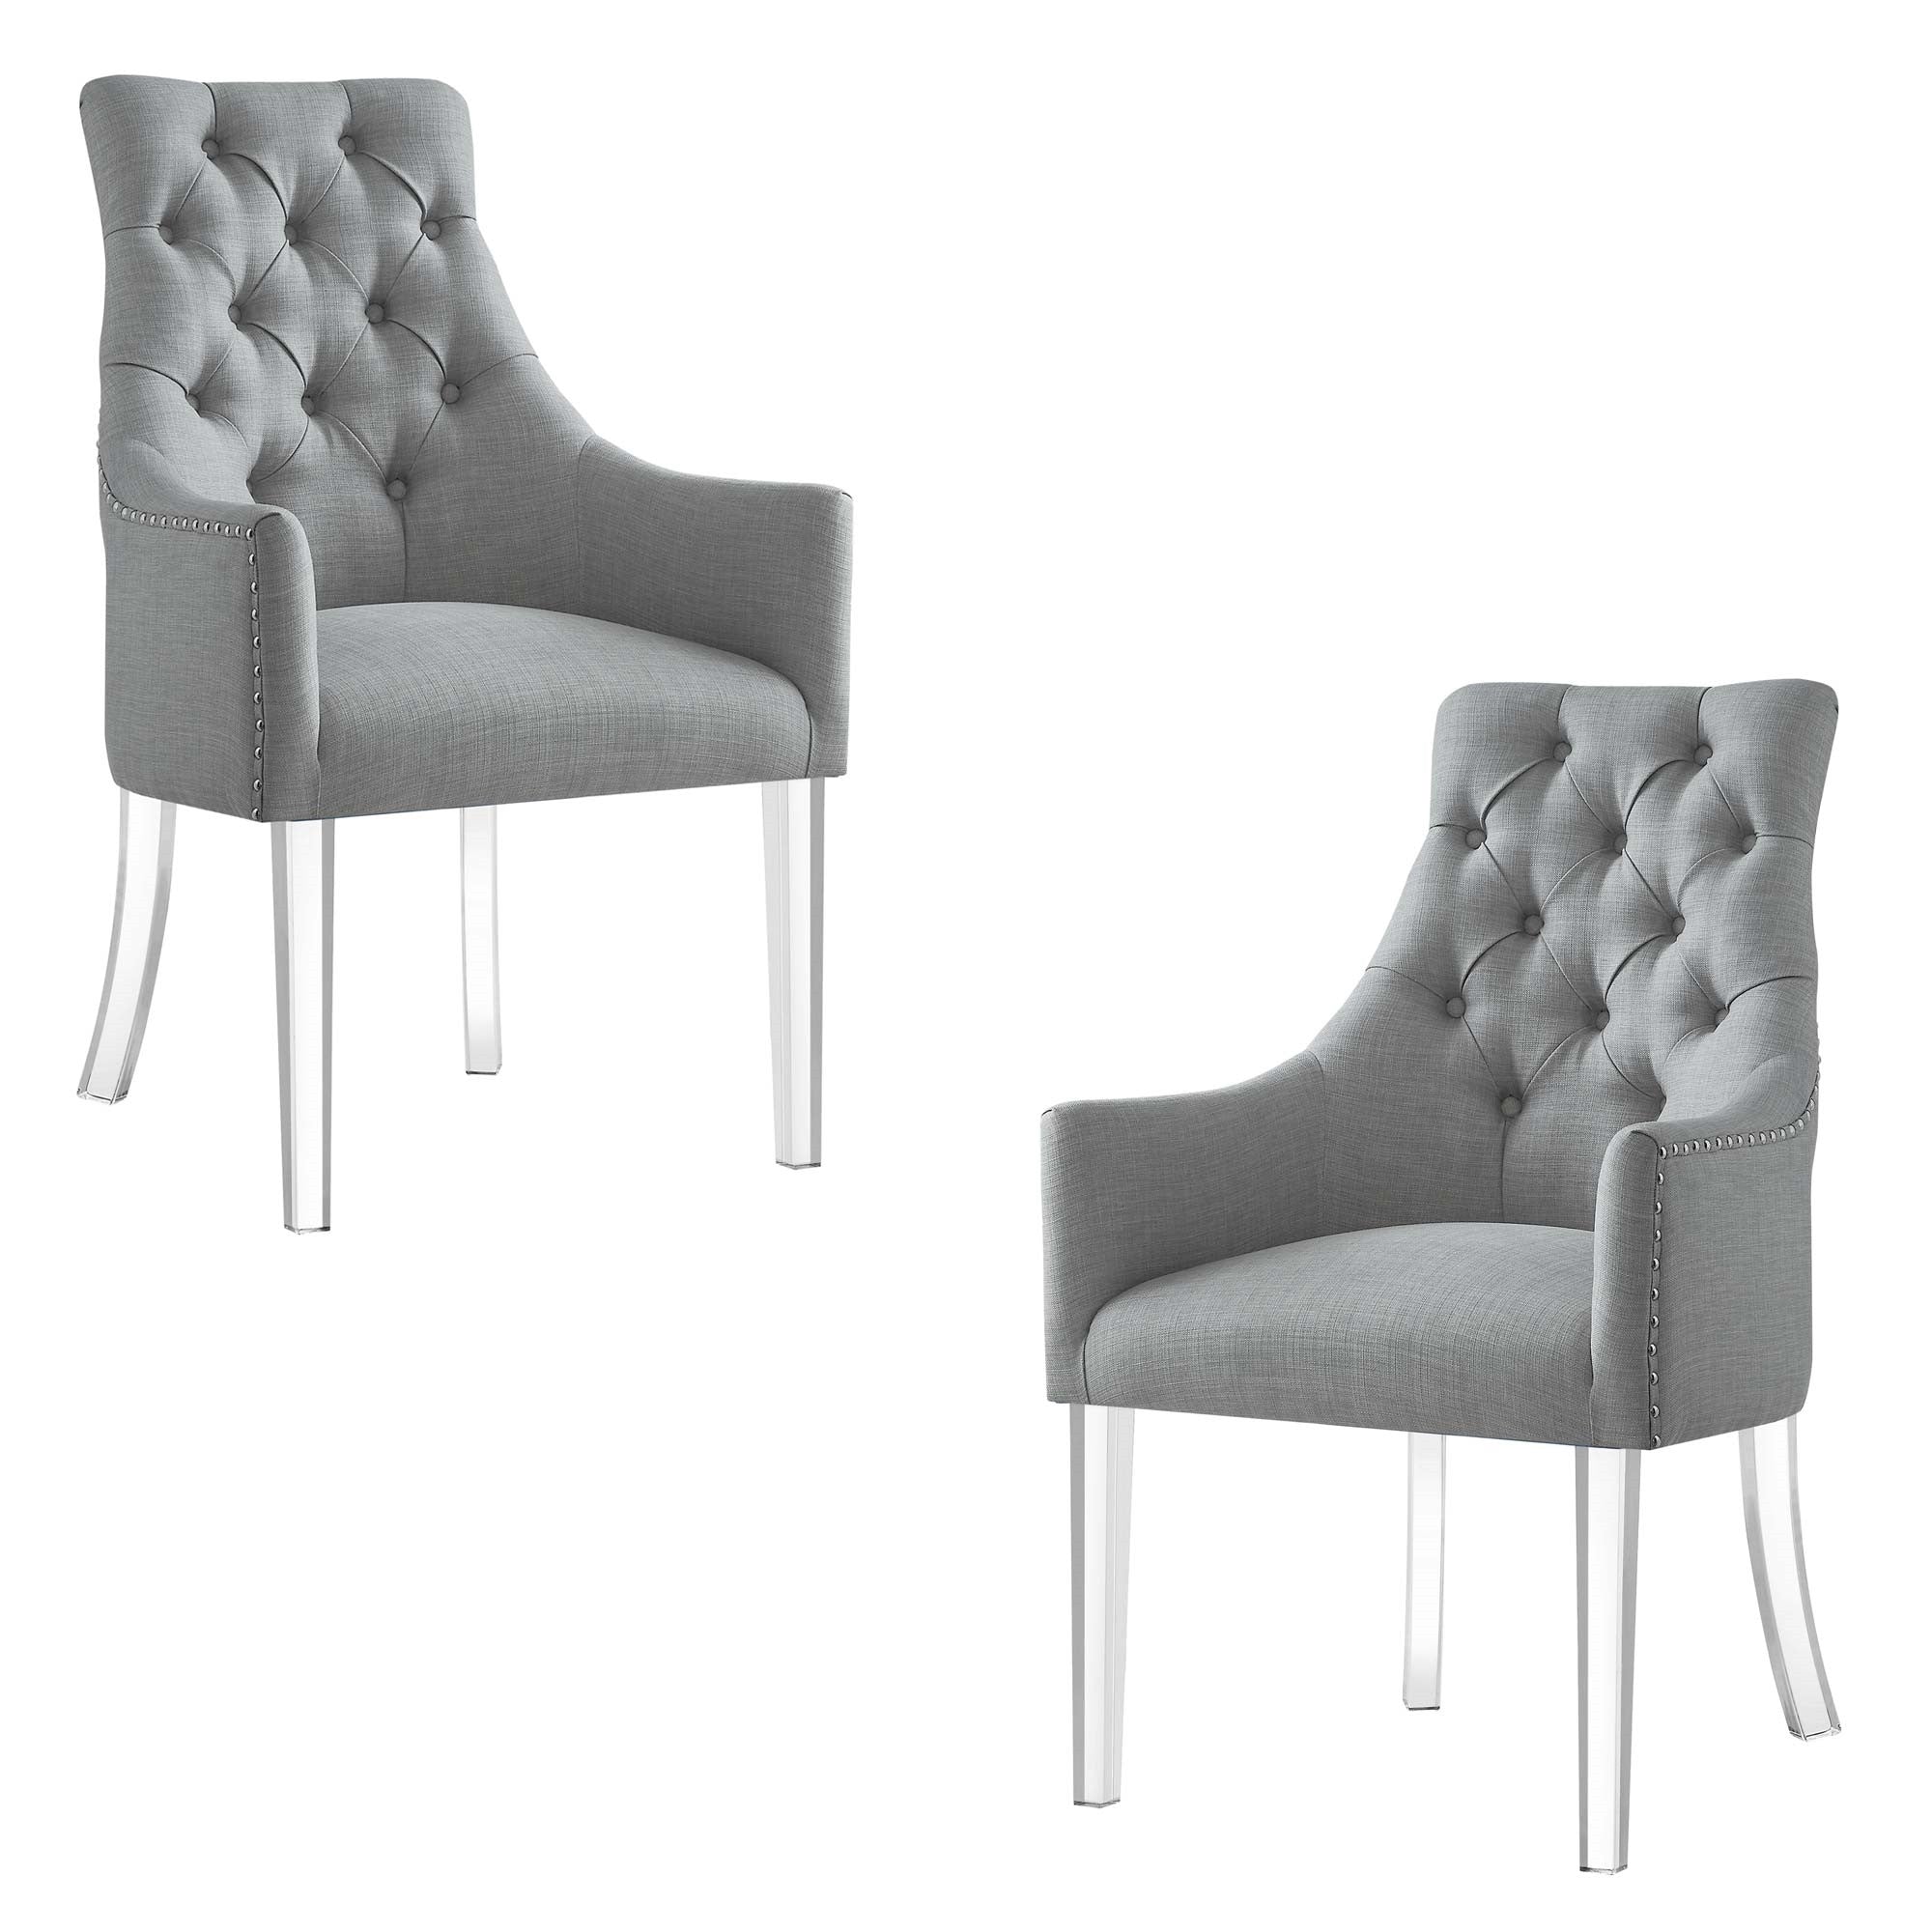 Set of Two Tufted Light Gray and Clear Upholstered Linen Dining Arm Chairs